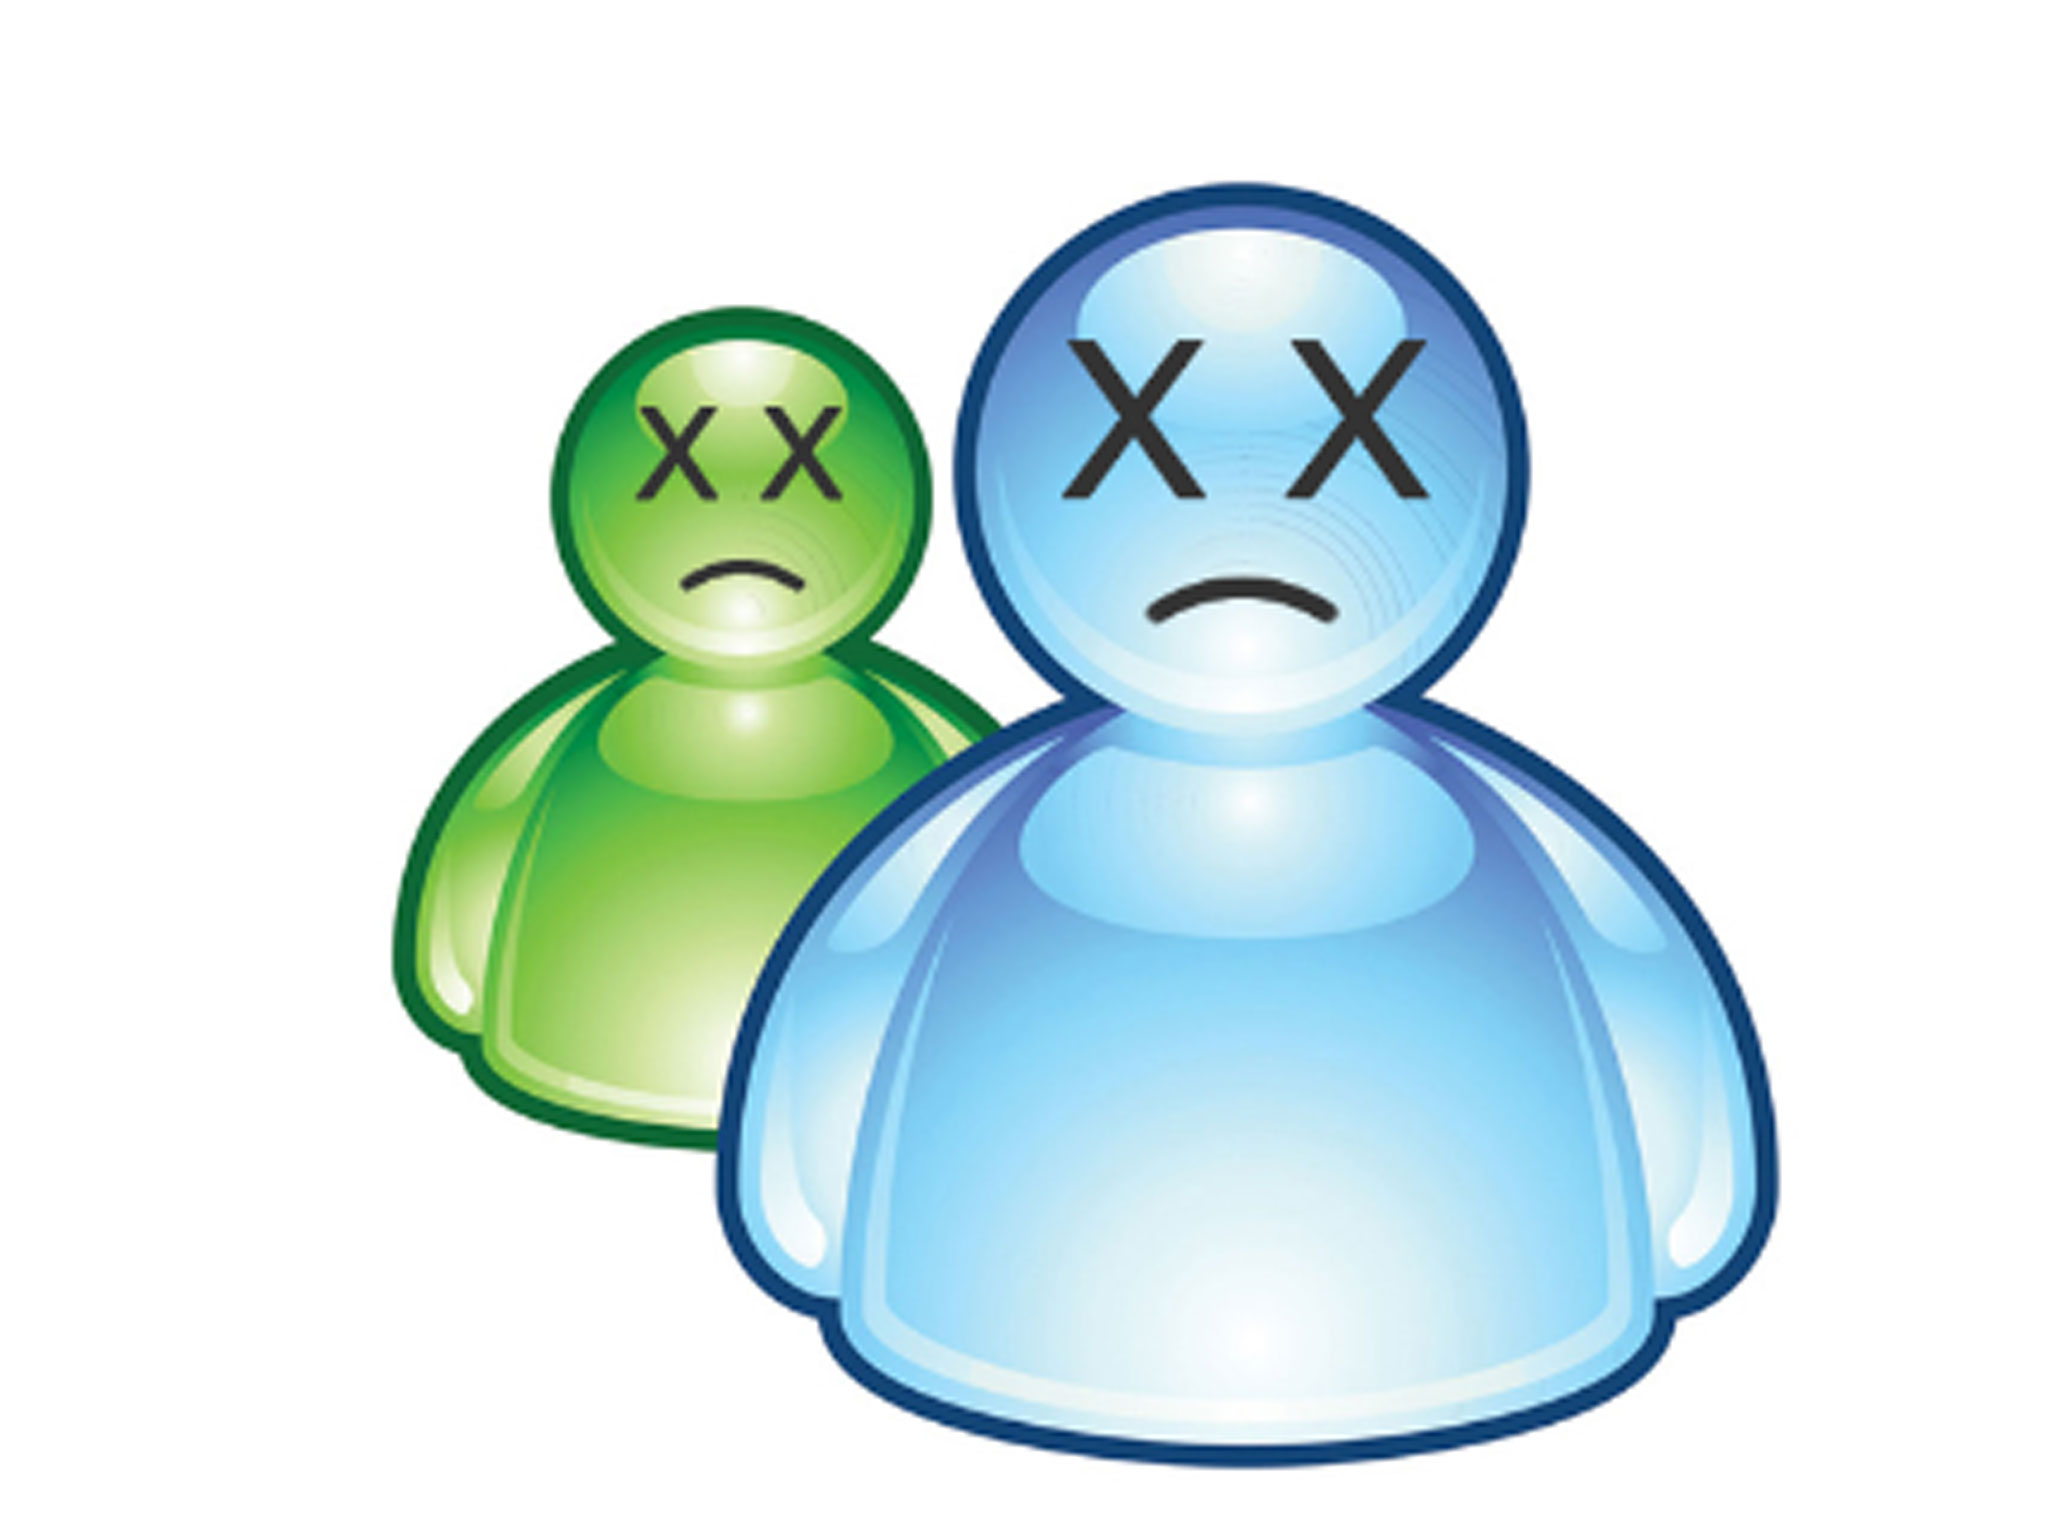 Geek insider, geekinsider, geekinsider. Com,, msn messenger is completely shutting down on october 31st, news